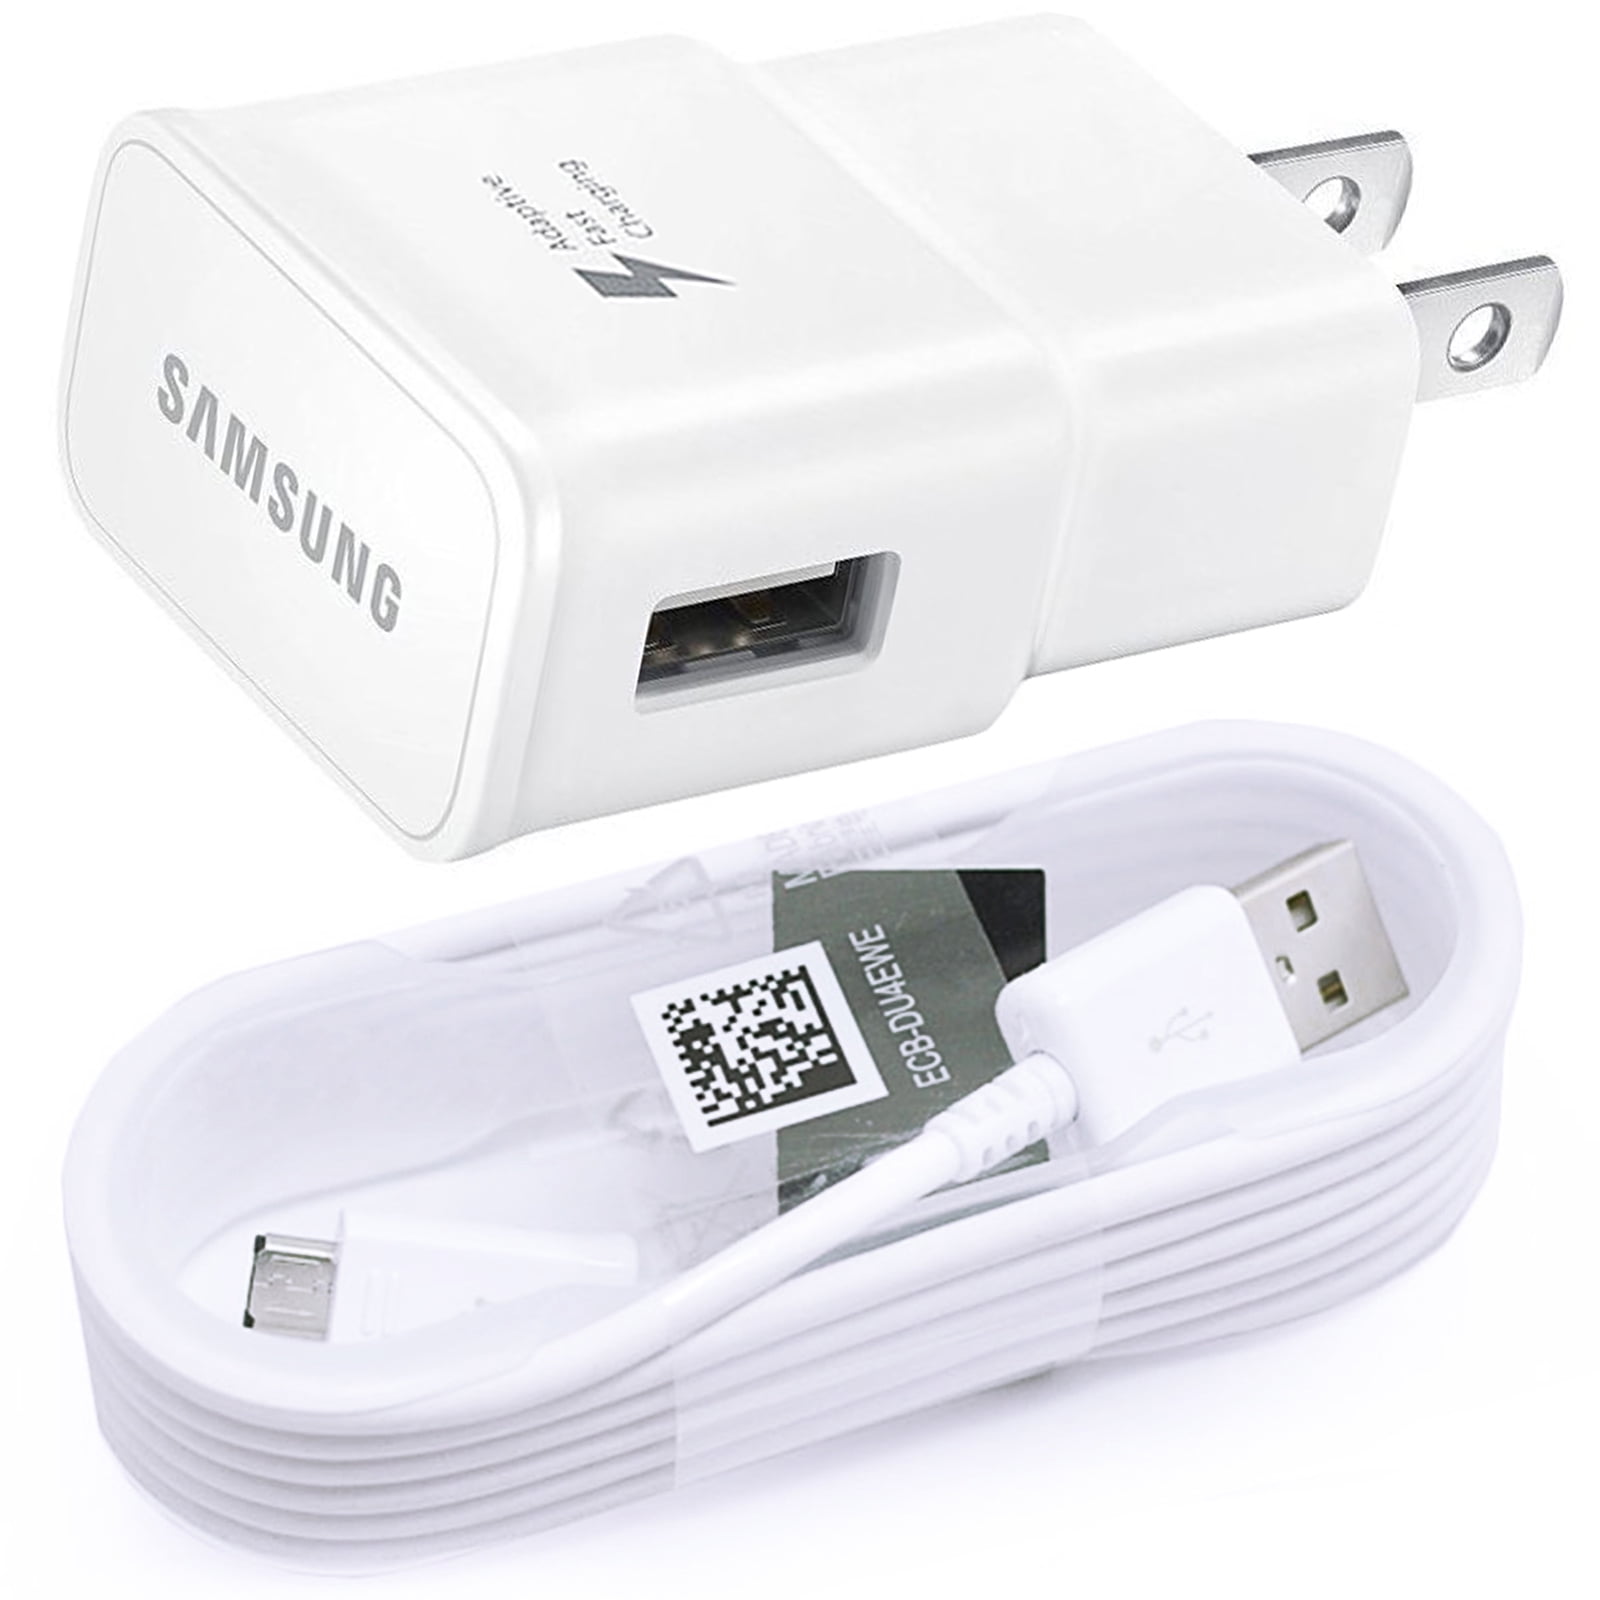 Piraat brand Trekker OEM Samsung Galaxy S6/S6 edge Galaxy S7 edge Adaptive Fast Charger Micro  USB 2.0 Cable Kit [1 Wall Charger + 5 FT Micro USB Cable] AFC uses dual  voltages for up to